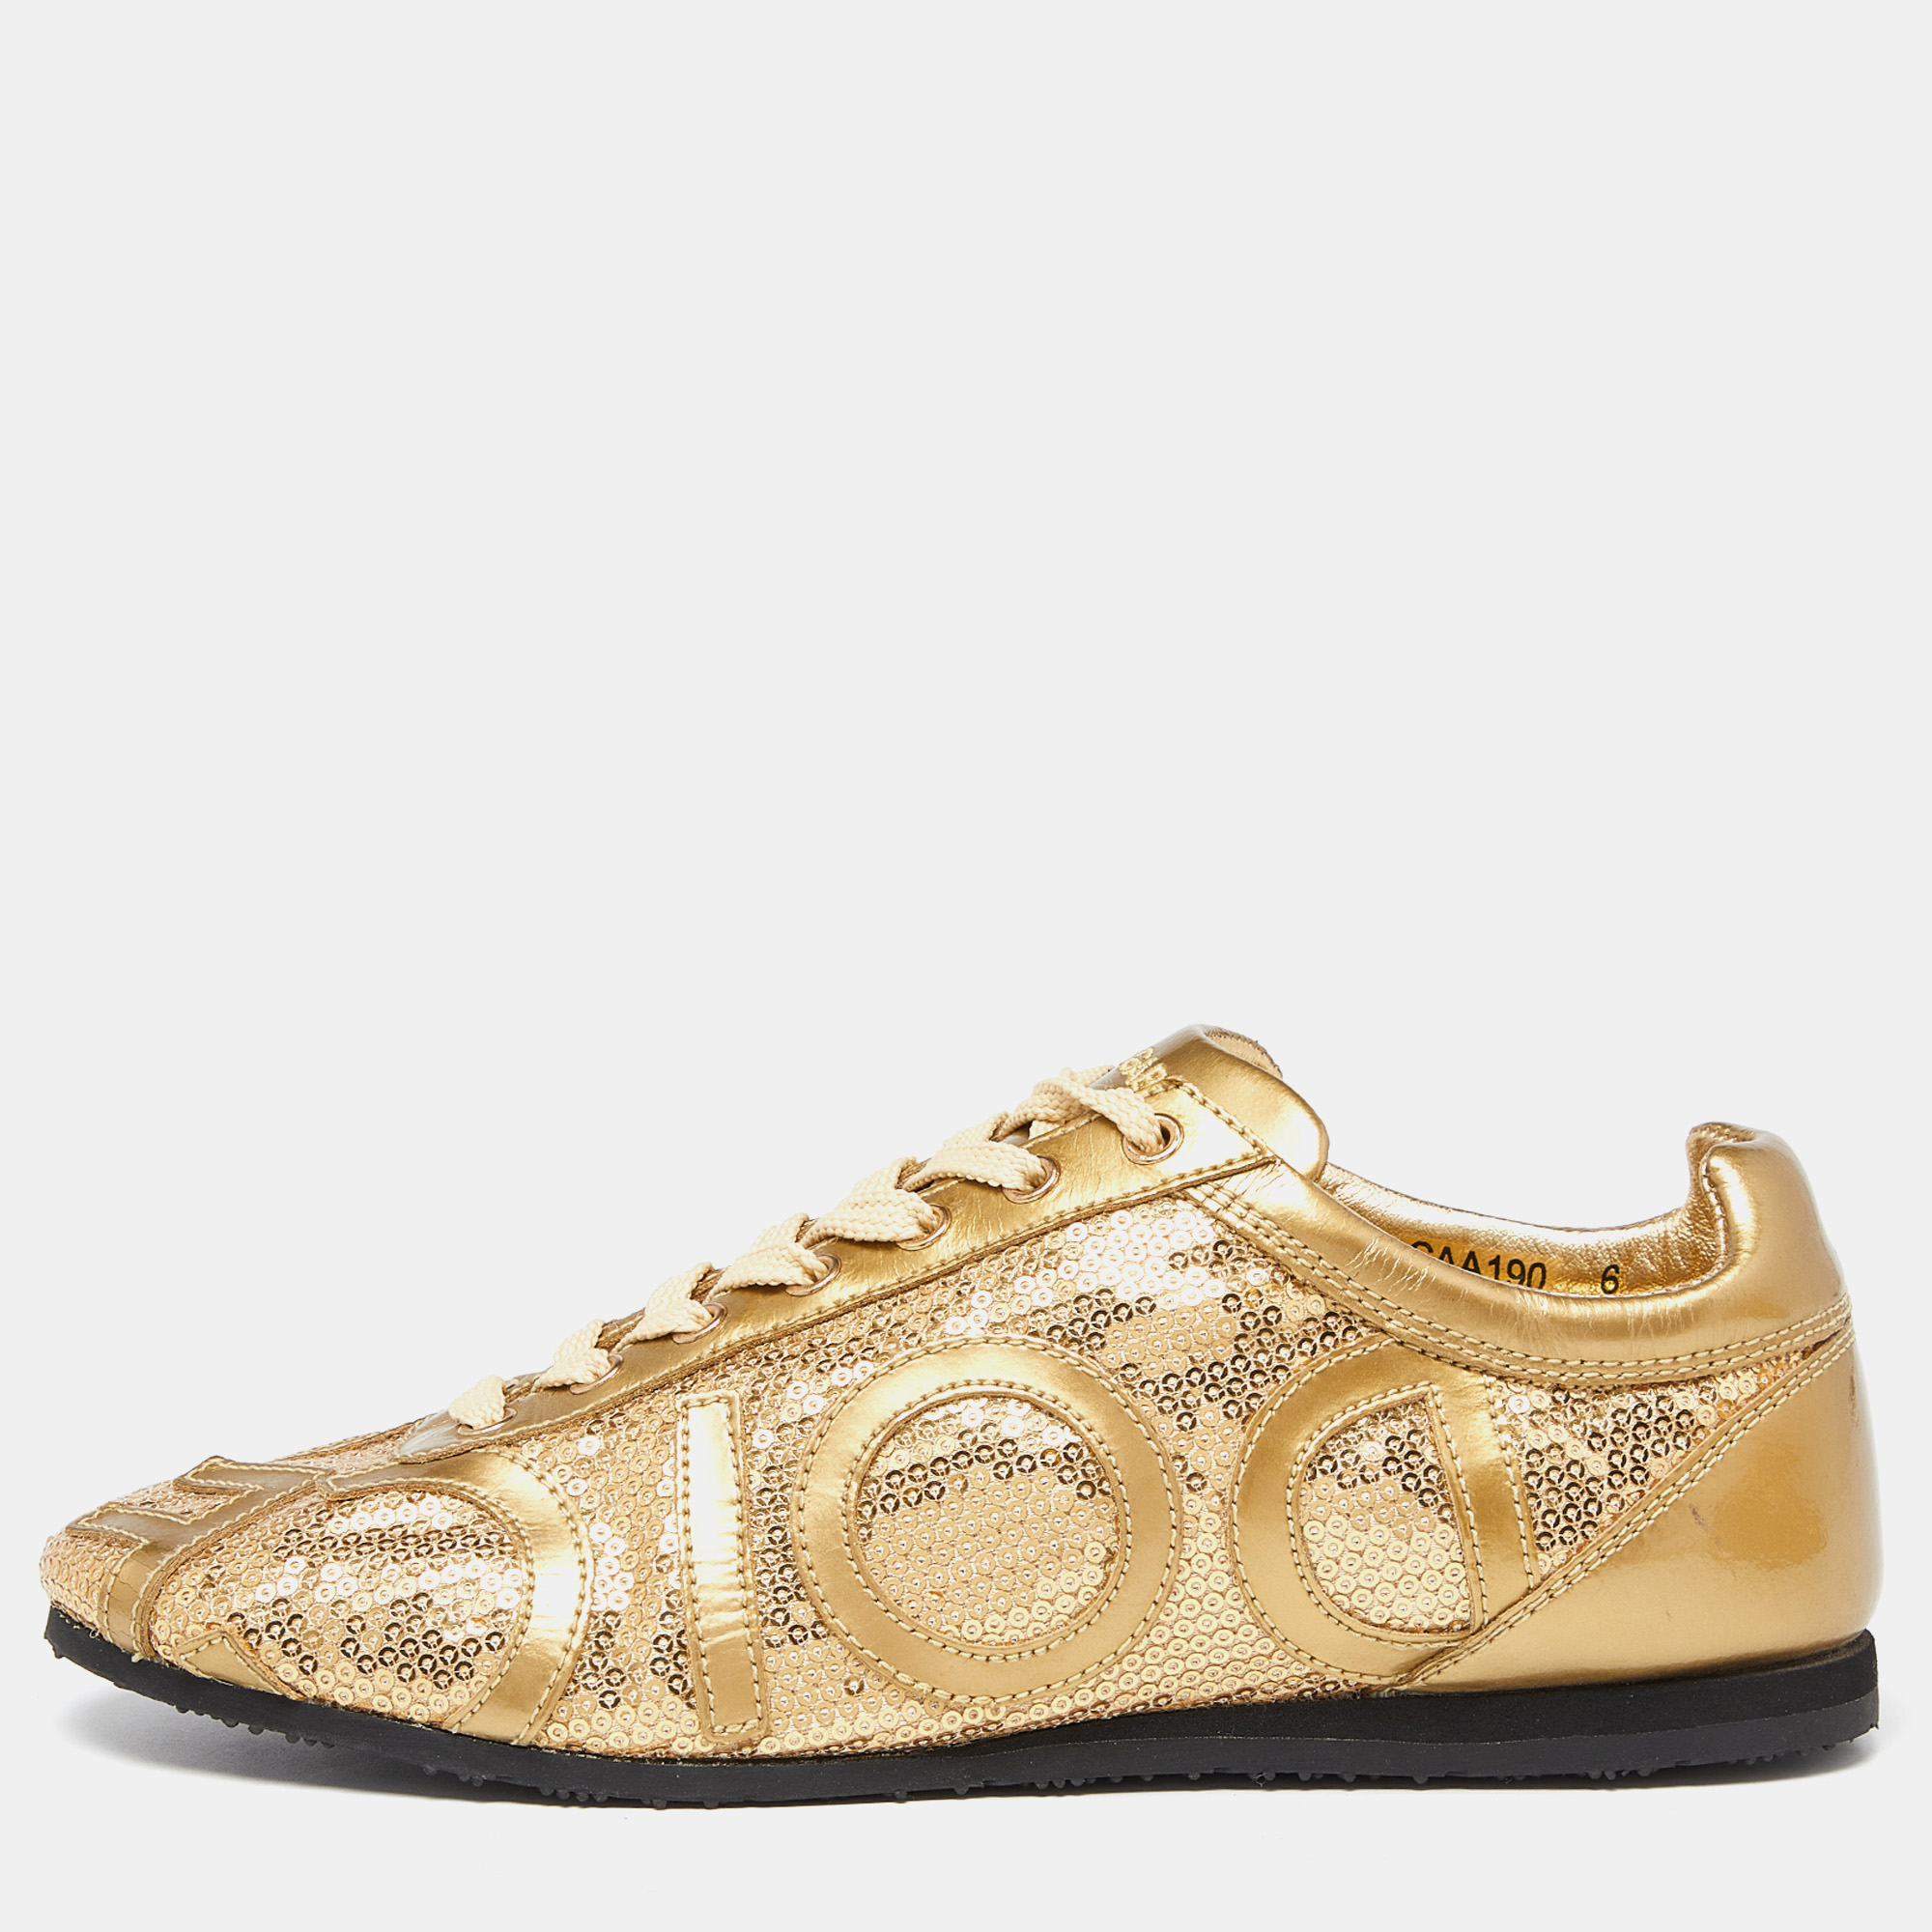 Pre-owned Dolce & Gabbana Gold Patent Leather And Sequin Embellished Low Top Sneakers Size 40